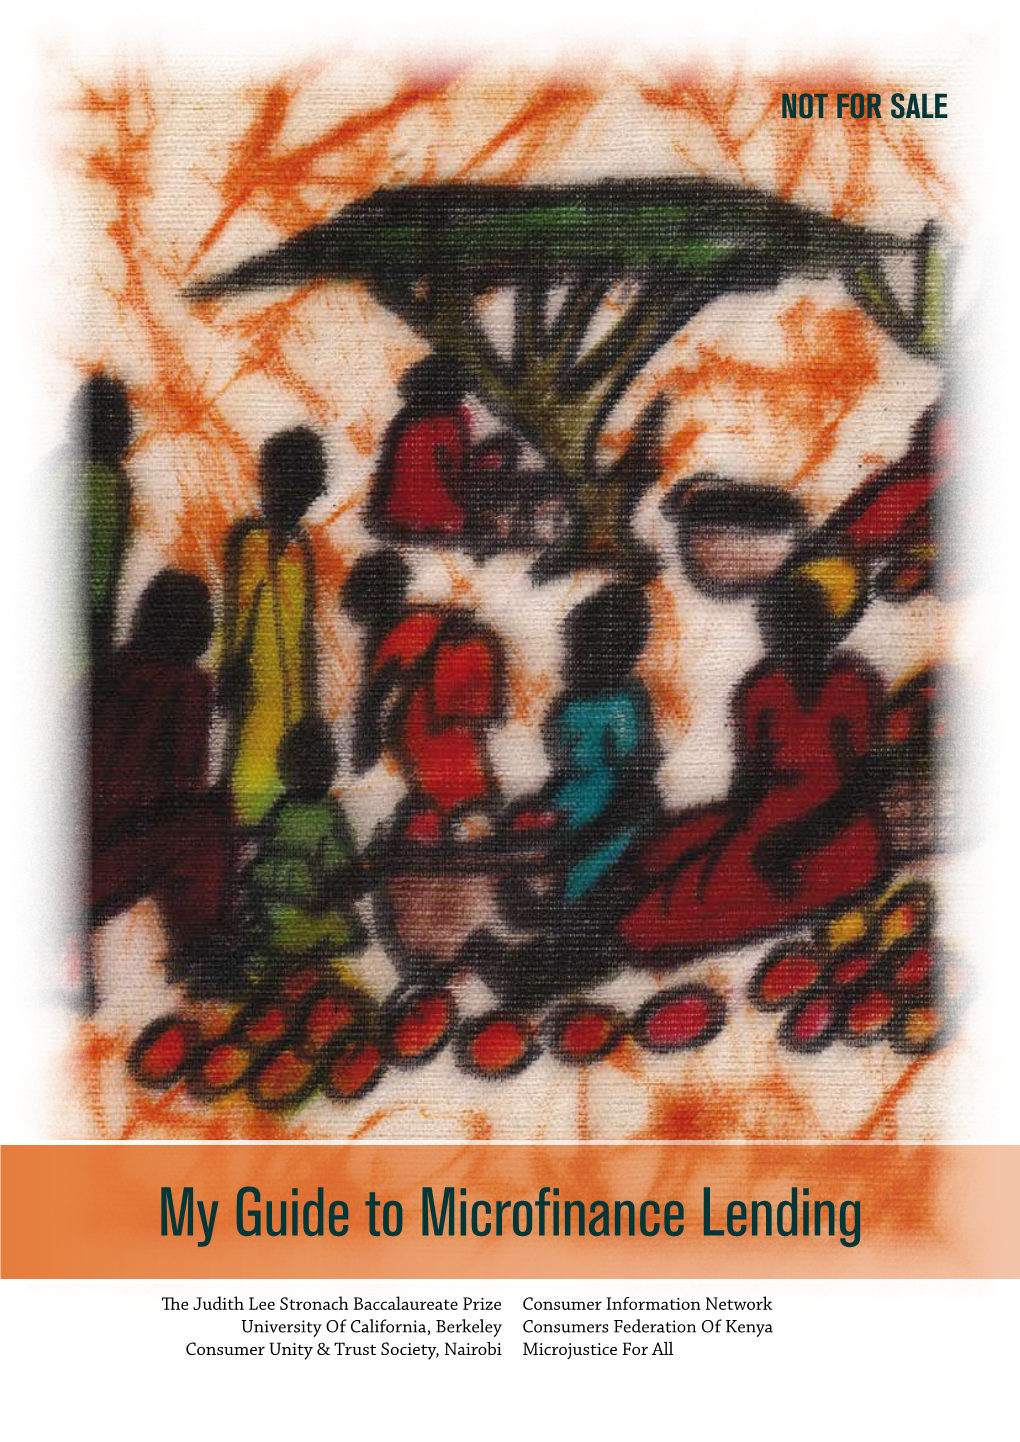 My Guide to Microfinance Lending